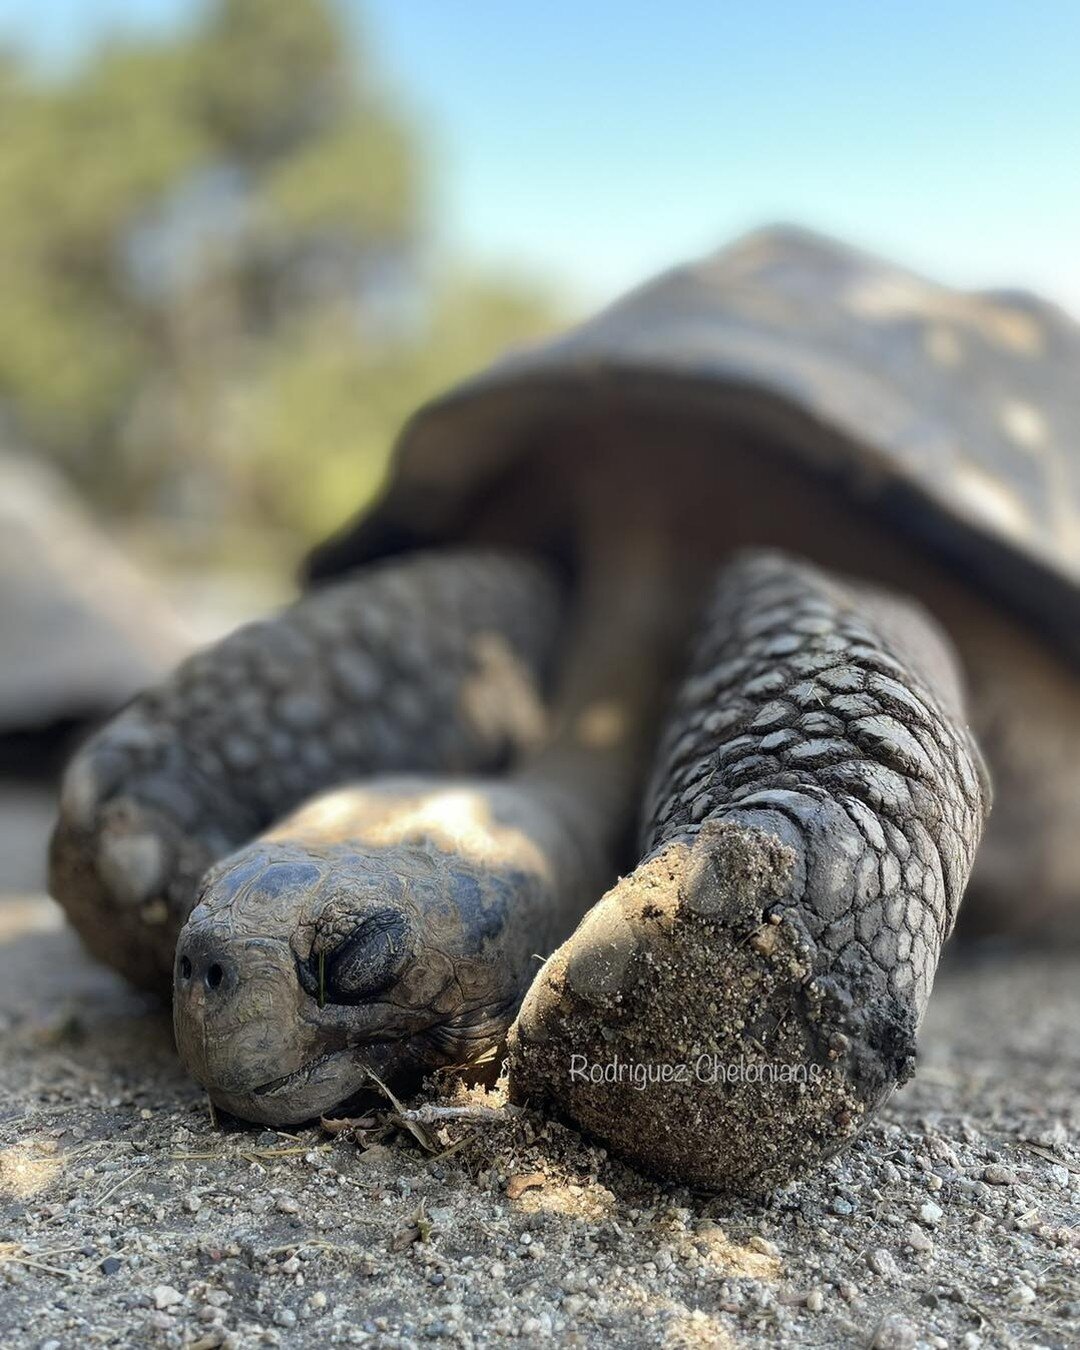 The summer heat is here and Gaetano thinks morning naps under the tree with his ladies are the best. 
#sweetdreams #sweetprince #wakemewhenthesprinklerscomeon #naptime #catchingsomezzzs #strechedout #starfishstyle #galapagostortoise #gaetanogalap #ca